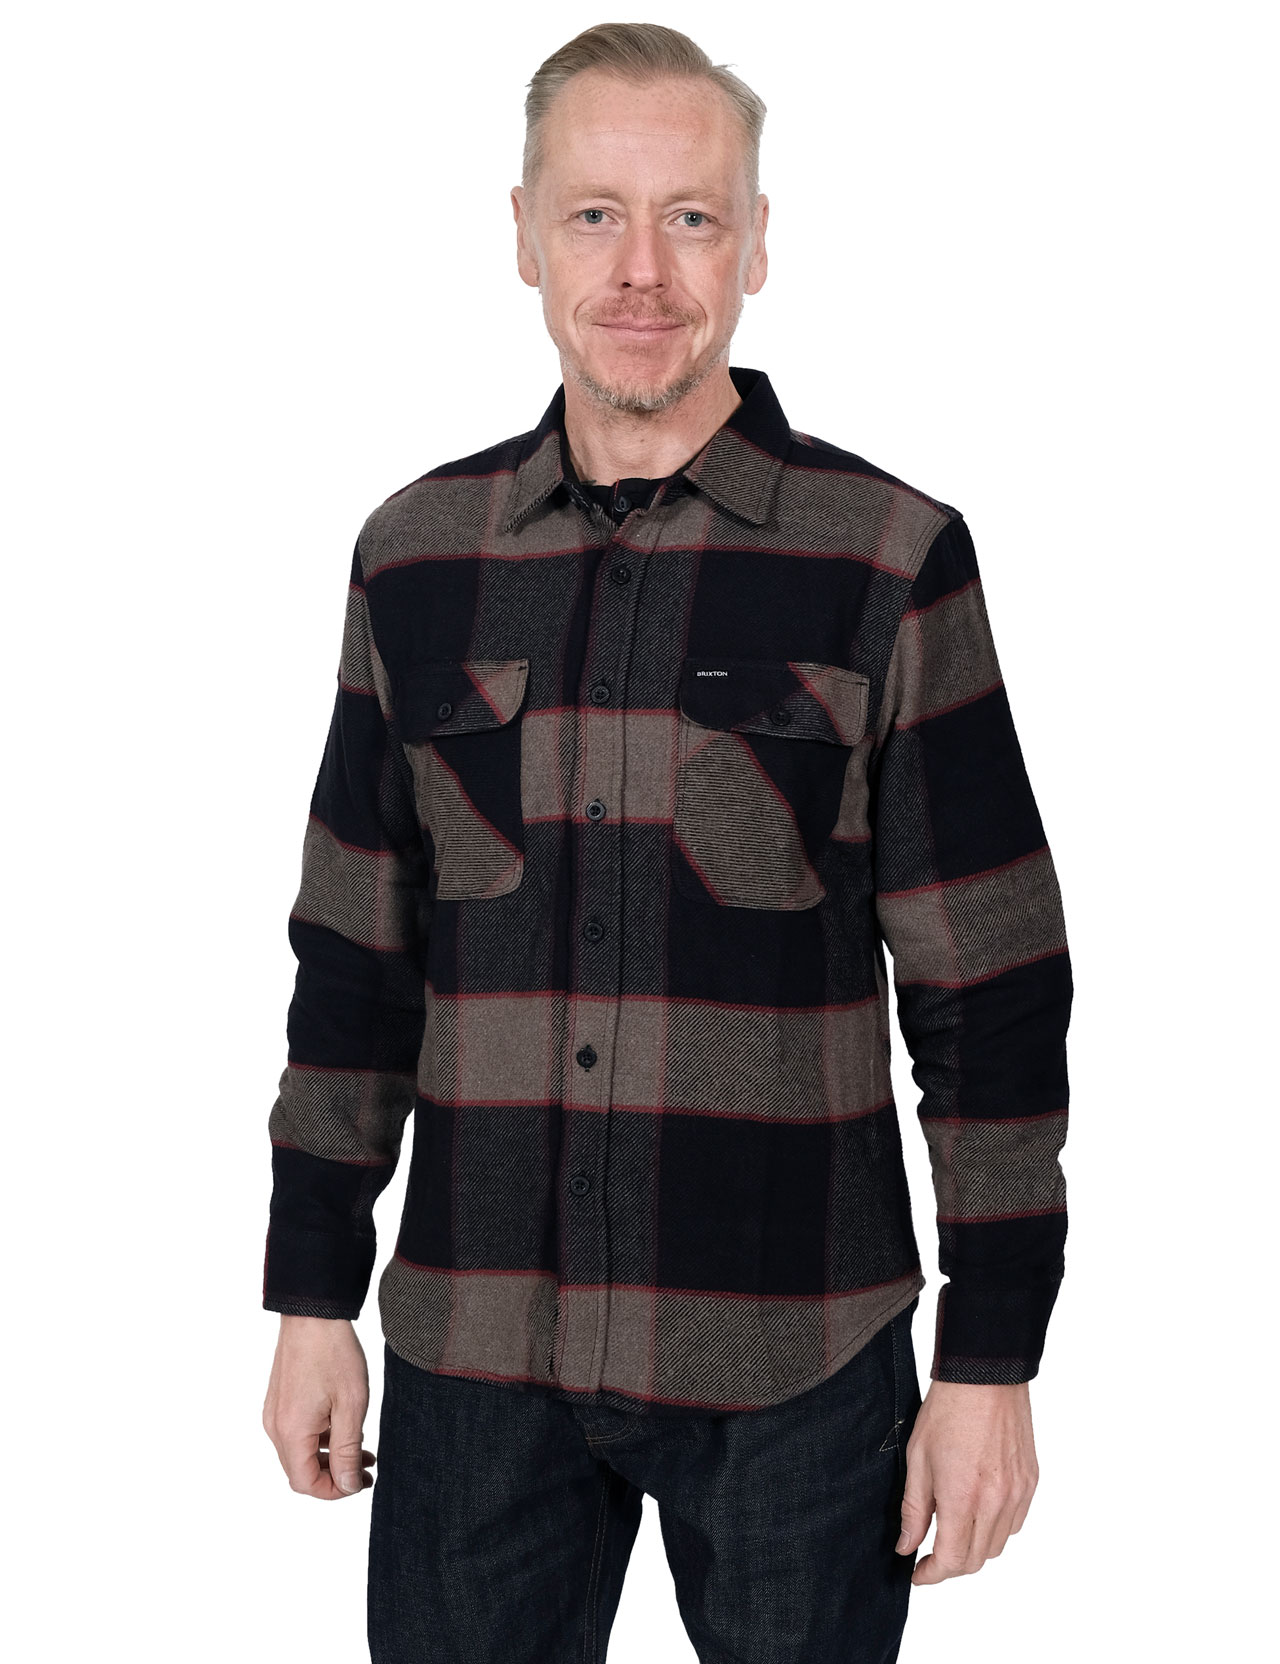 Brixton---Bowery-Flannel-Shirt---Heather-Gre-Charcoal-1233